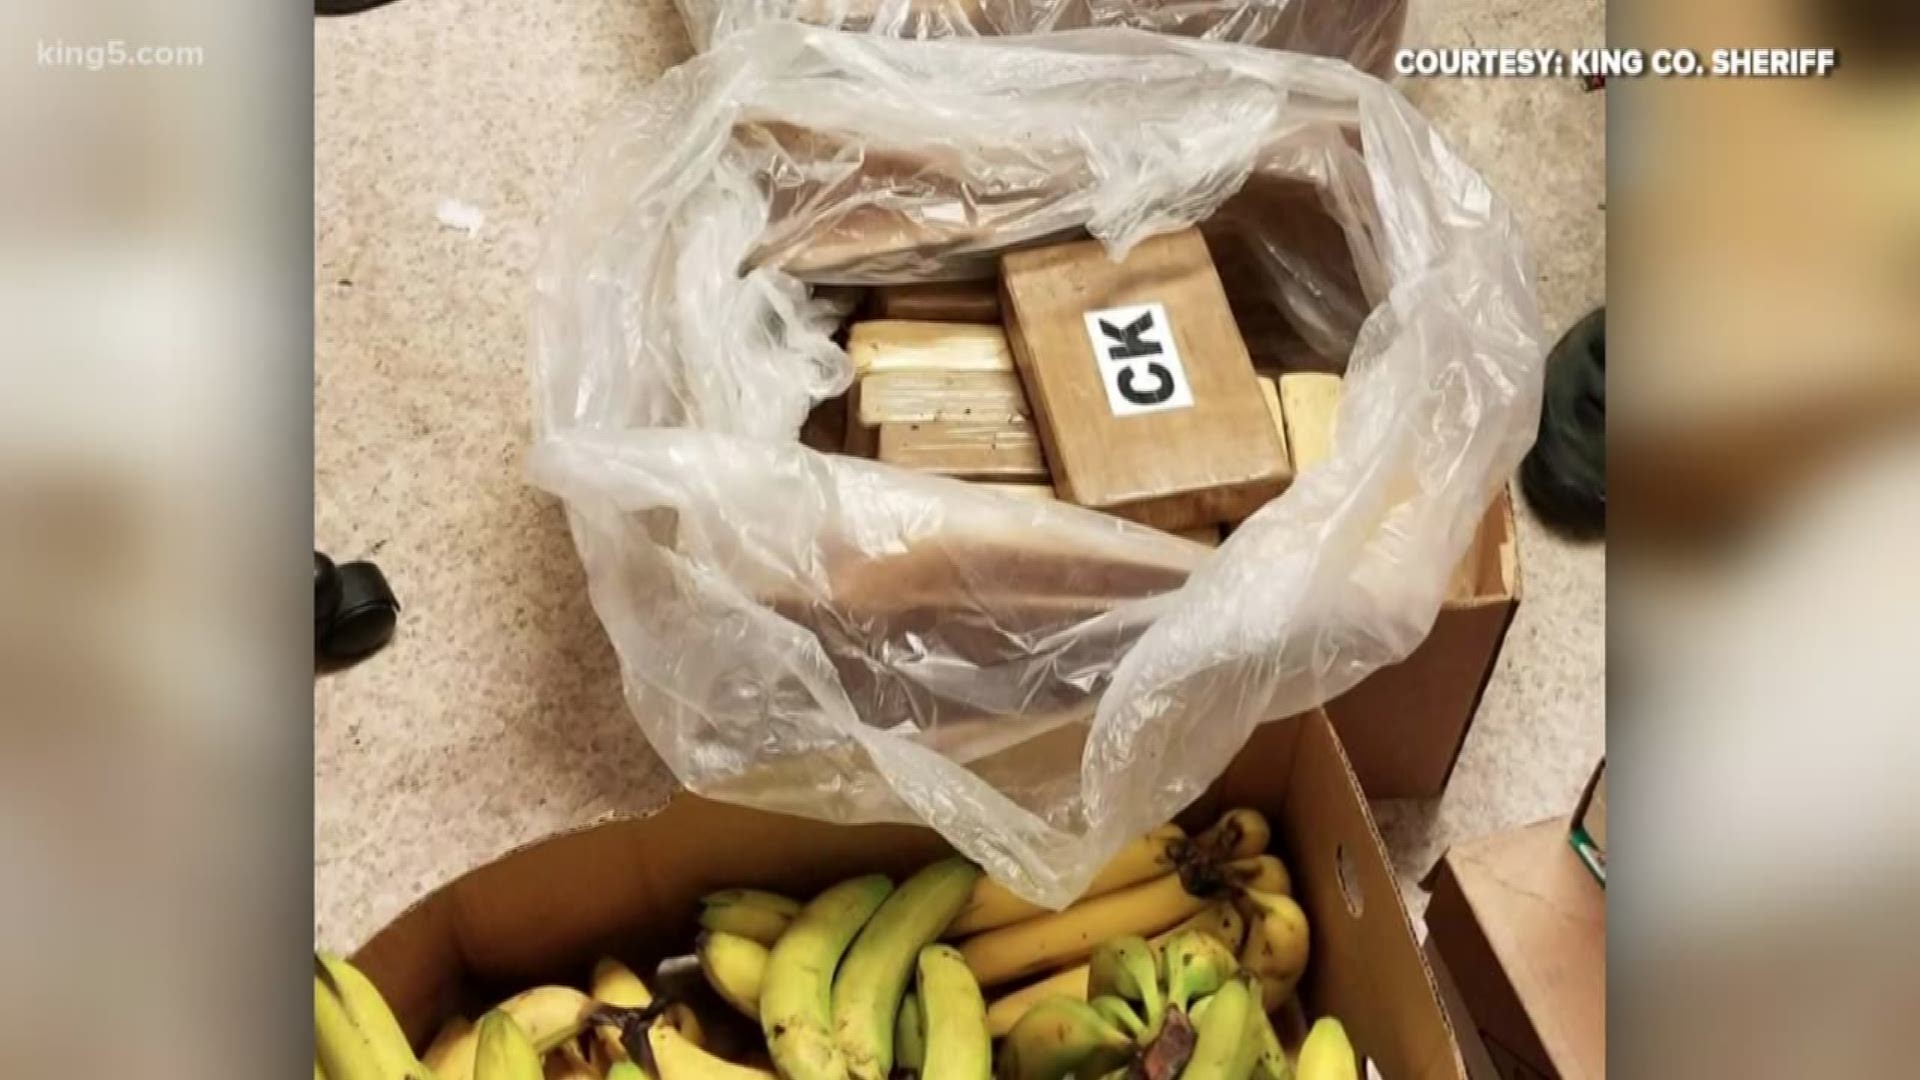 Cocaine valued at more than $1 million was found inside shipments of bananas at three Safeway stores in Western Washington. KING 5's Kalie Greenberg reports.